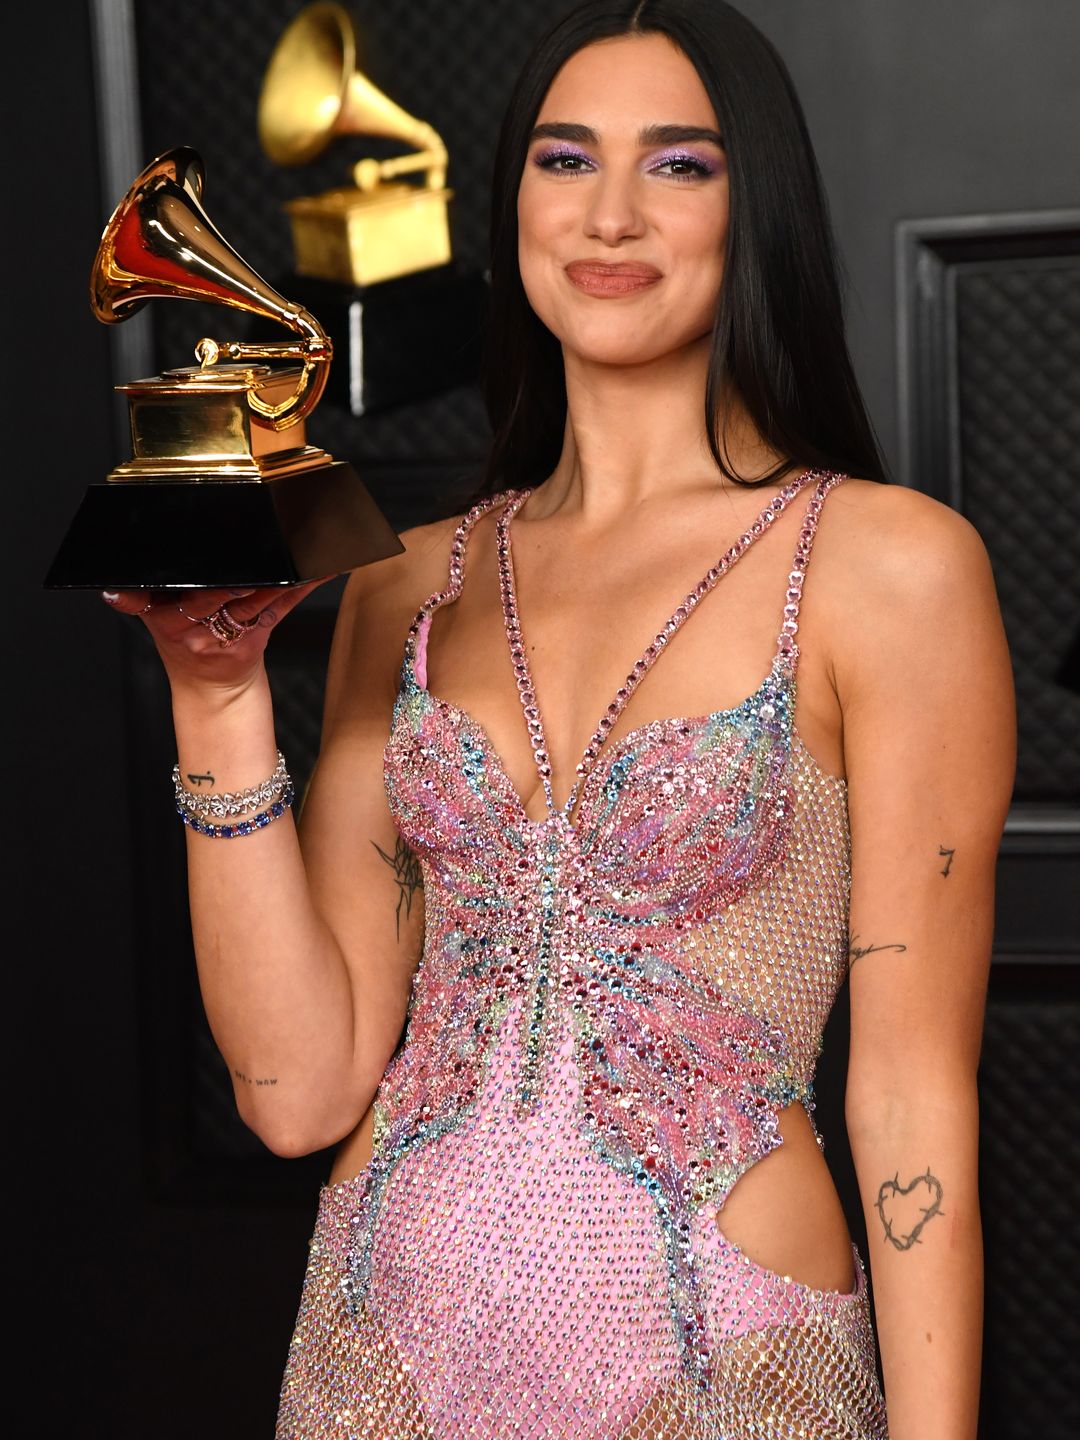 Dua Lipa, winner of Best Pop Vocal Album for Future Nostalgia, poses in the media room during the 63rd Annual GRAMMY Awards at Los Angeles Convention Center on March 14, 2021 in Los Angeles, California.